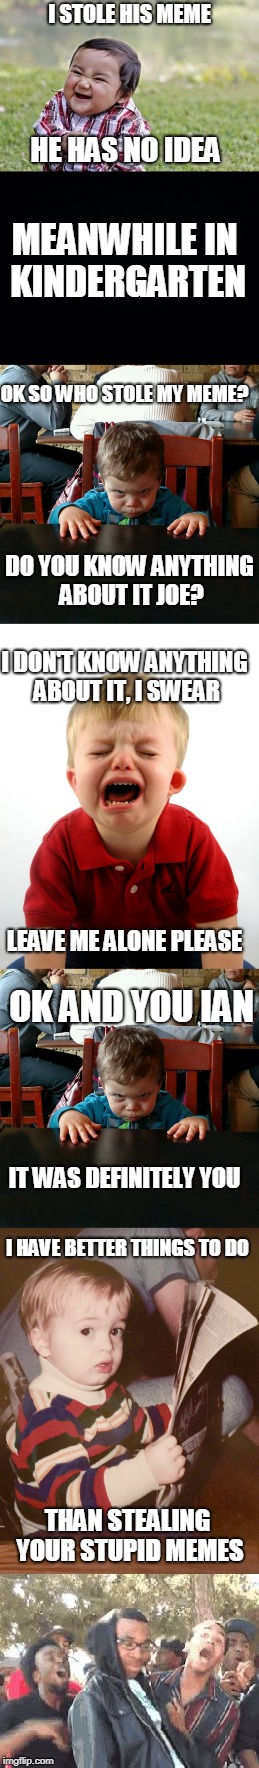 Turned out much longer than i expected (evil toddler week, DomDoesMemes event) | I STOLE HIS MEME; HE HAS NO IDEA; MEANWHILE IN KINDERGARTEN; OK SO WHO STOLE MY MEME? DO YOU KNOW ANYTHING ABOUT IT JOE? I DON'T KNOW ANYTHING ABOUT IT, I SWEAR; LEAVE ME ALONE PLEASE; OK AND YOU IAN; IT WAS DEFINITELY YOU; I HAVE BETTER THINGS TO DO; THAN STEALING YOUR STUPID MEMES | image tagged in evil toddler,evil toddler week,kindergarten,stealing,memes,domdoesmemes | made w/ Imgflip meme maker